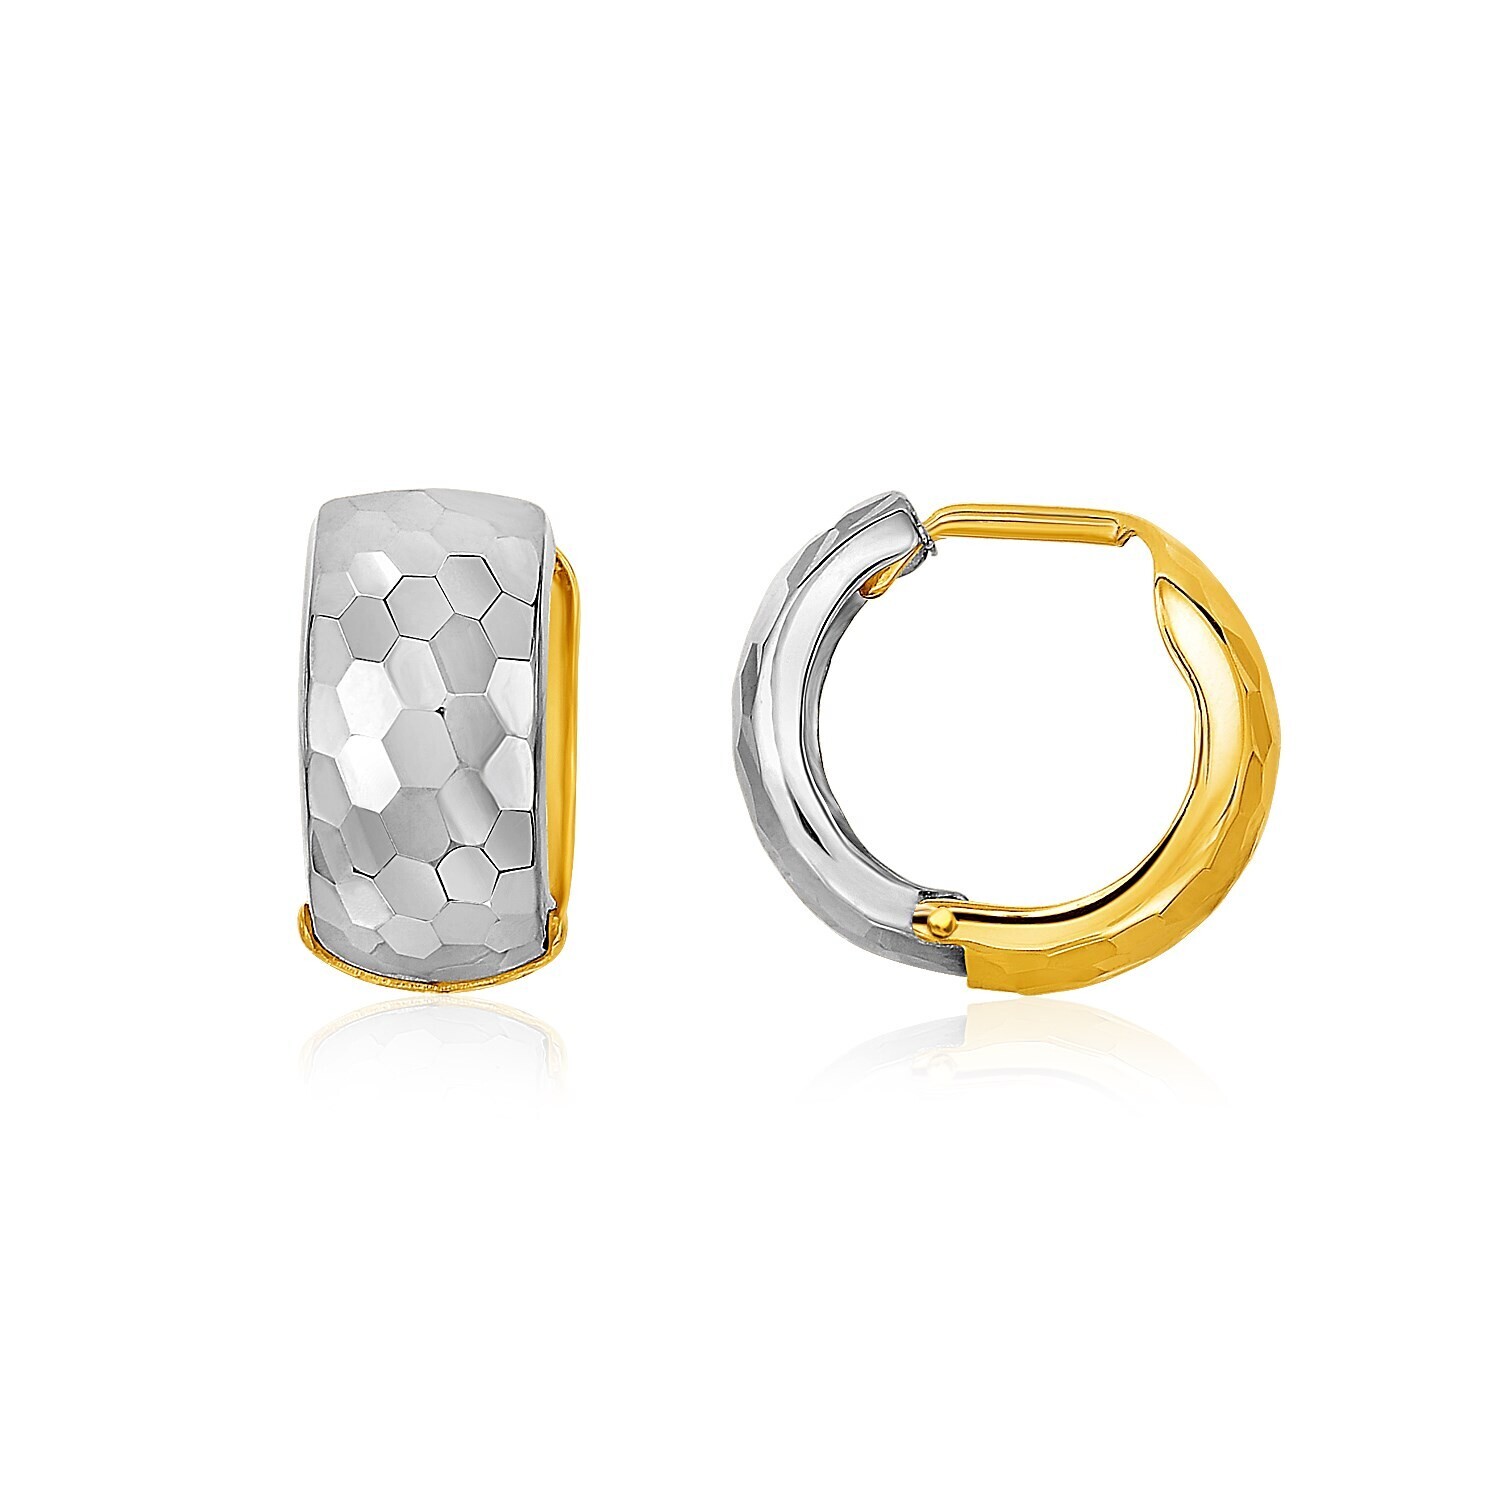 14k Two-Tone Gold Diamond Cut and Interlaced Style Hoop Earrings